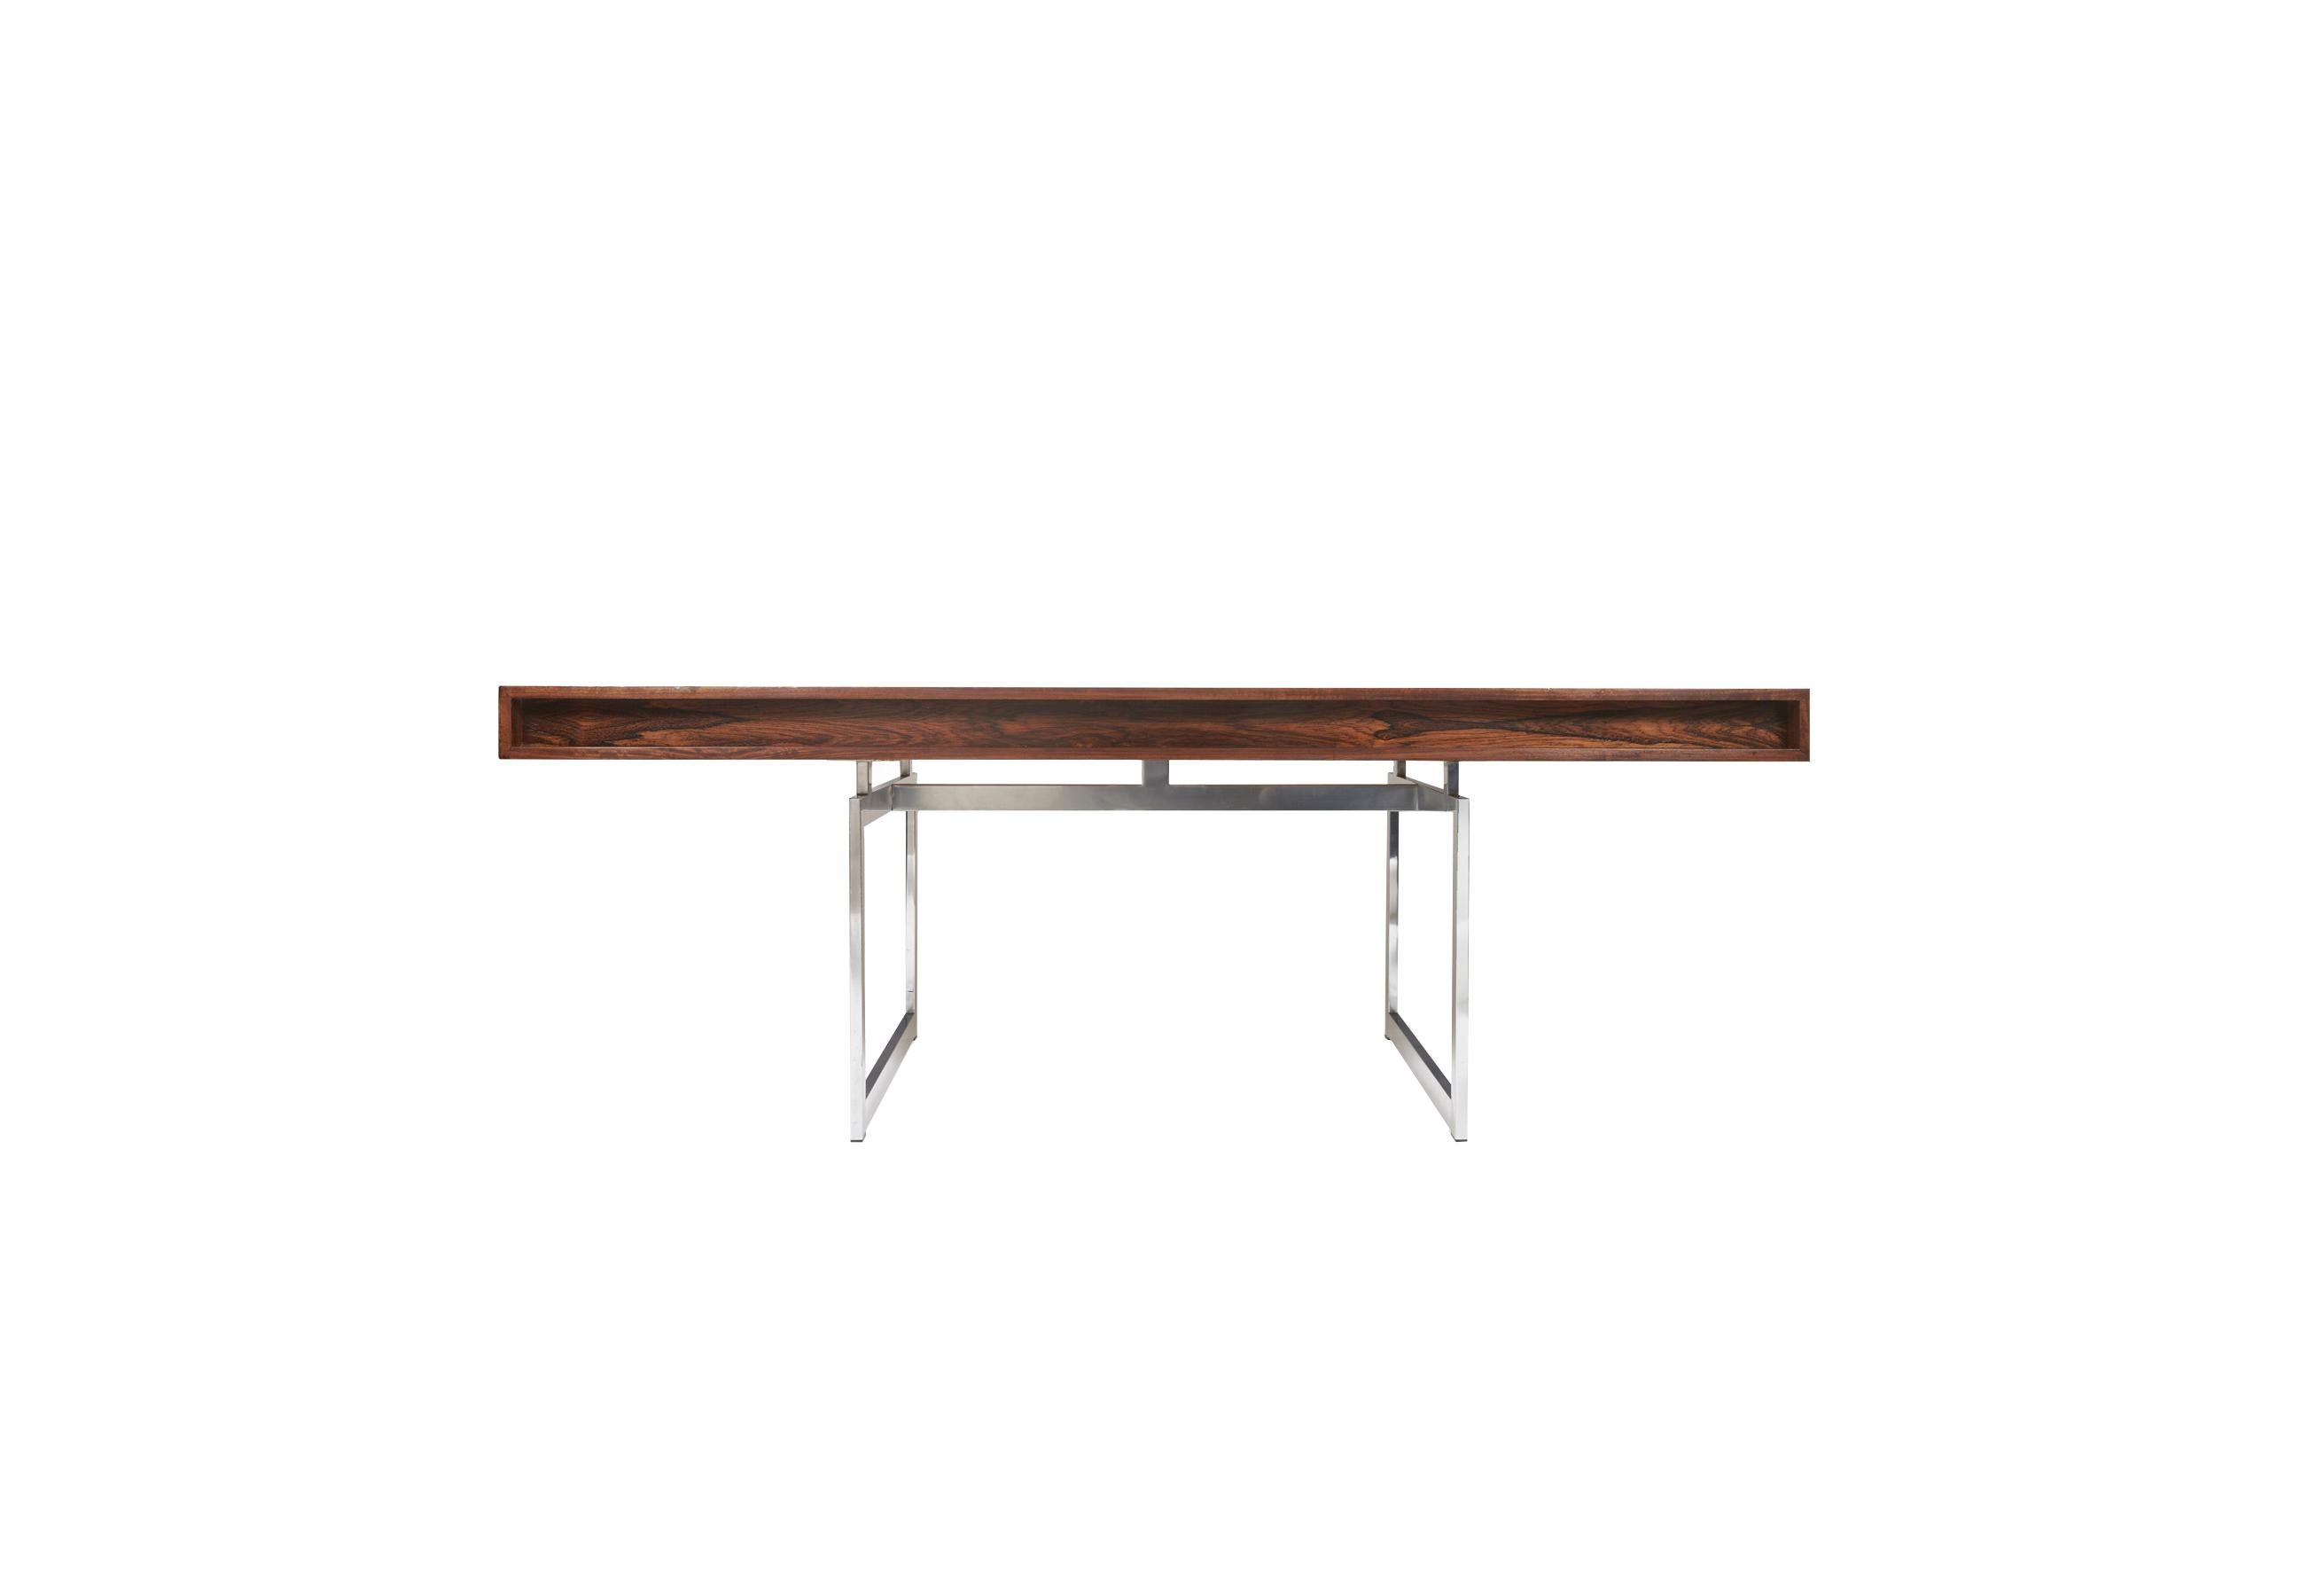 Bodil Kjaer large freestanding rosewood executive desk, model 901 with chrome-plated metal frame, cassette top with four recessed drawers. Produced by E. Pedersen & Søn, Denmark. Manufacturer’s label to the underside. Key included.

The desk was